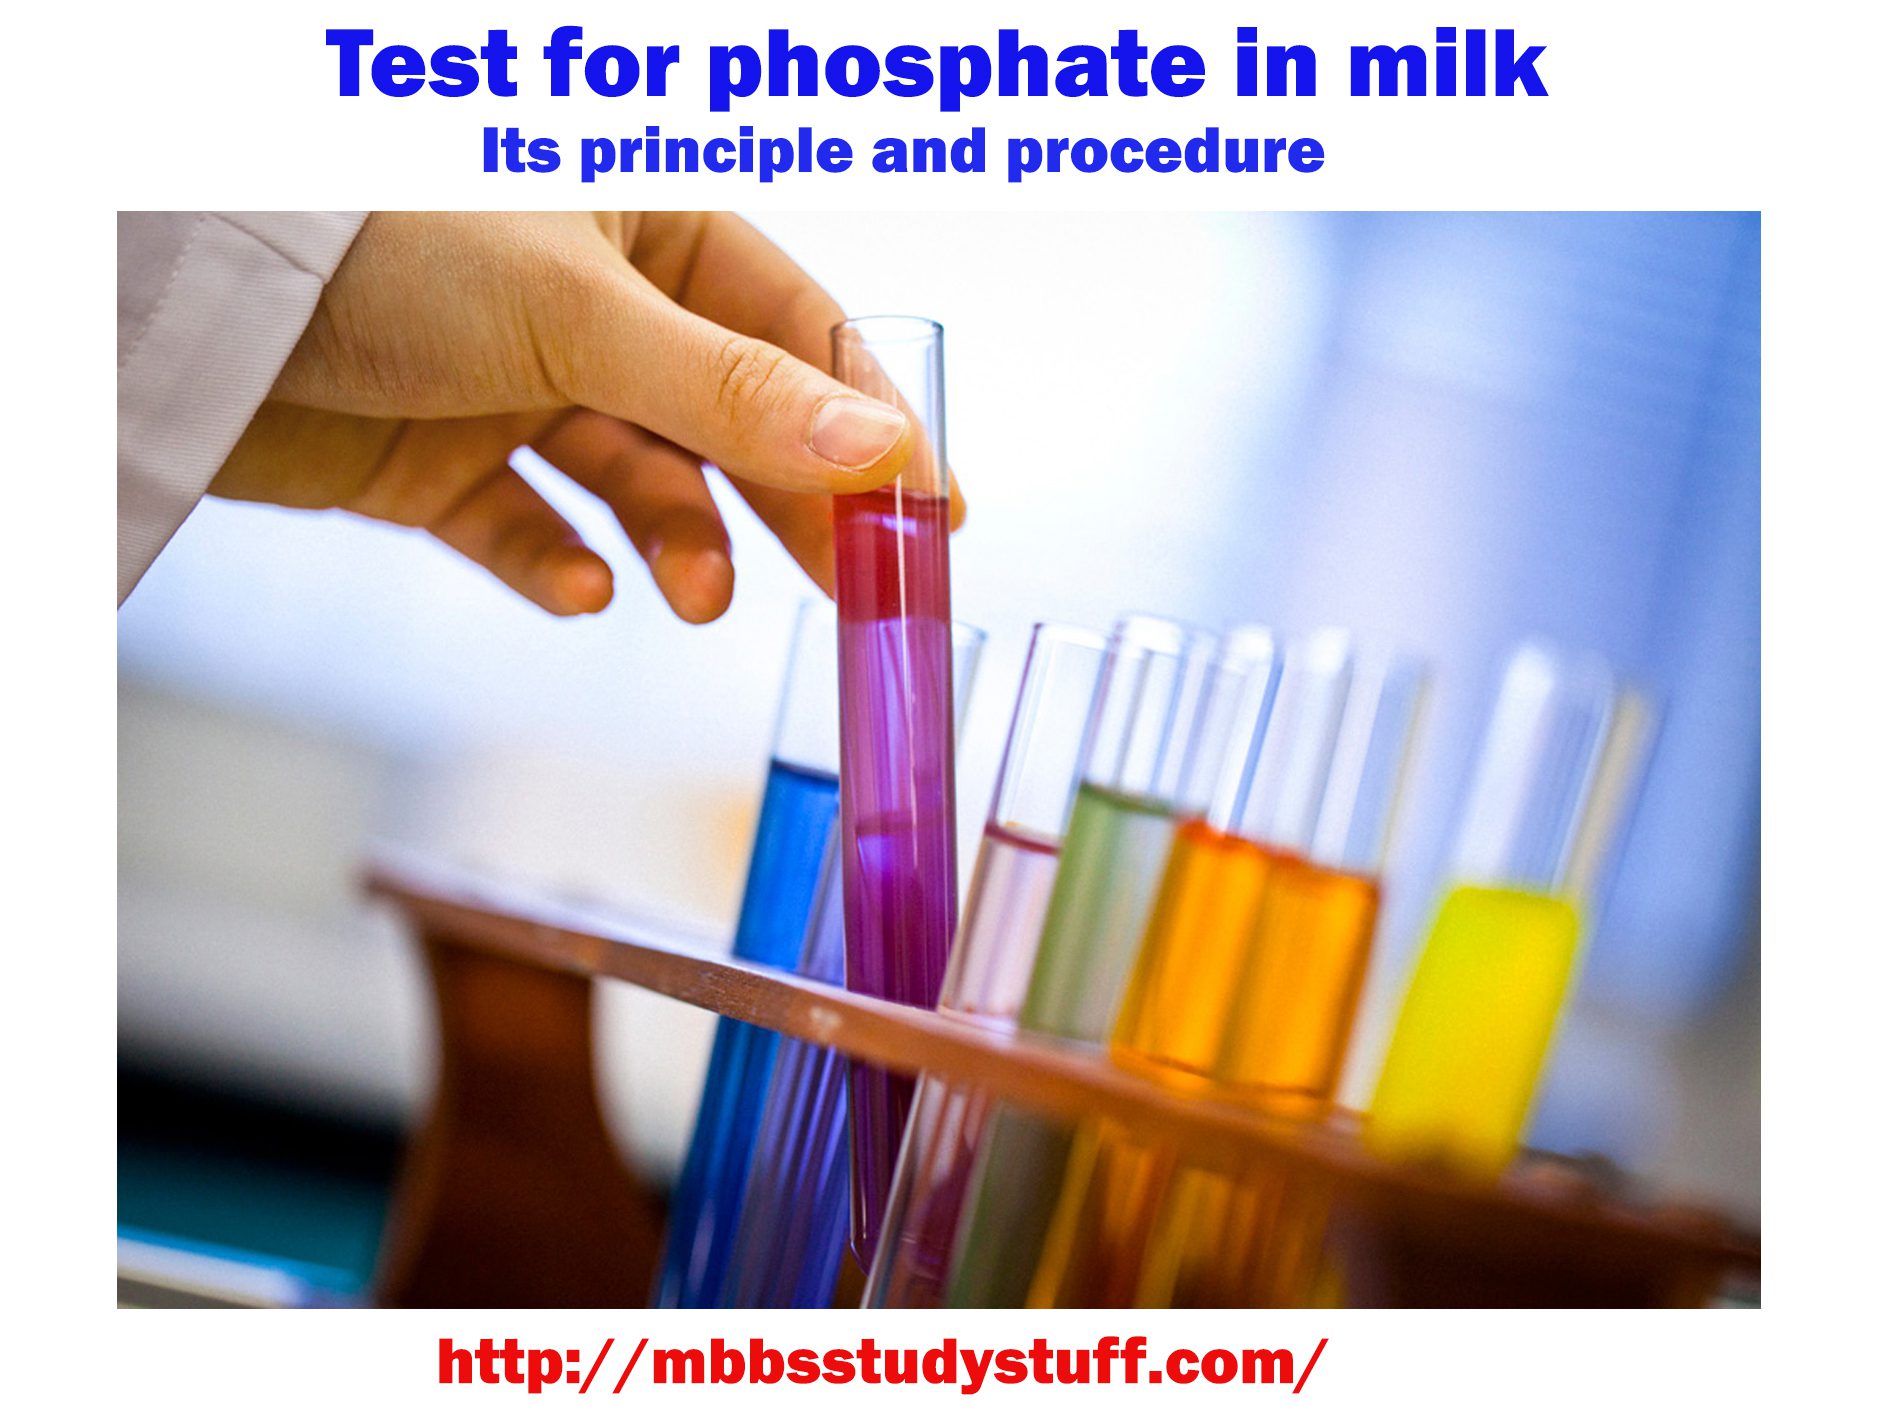 Test for phosphate in milk - Its principle and procedure